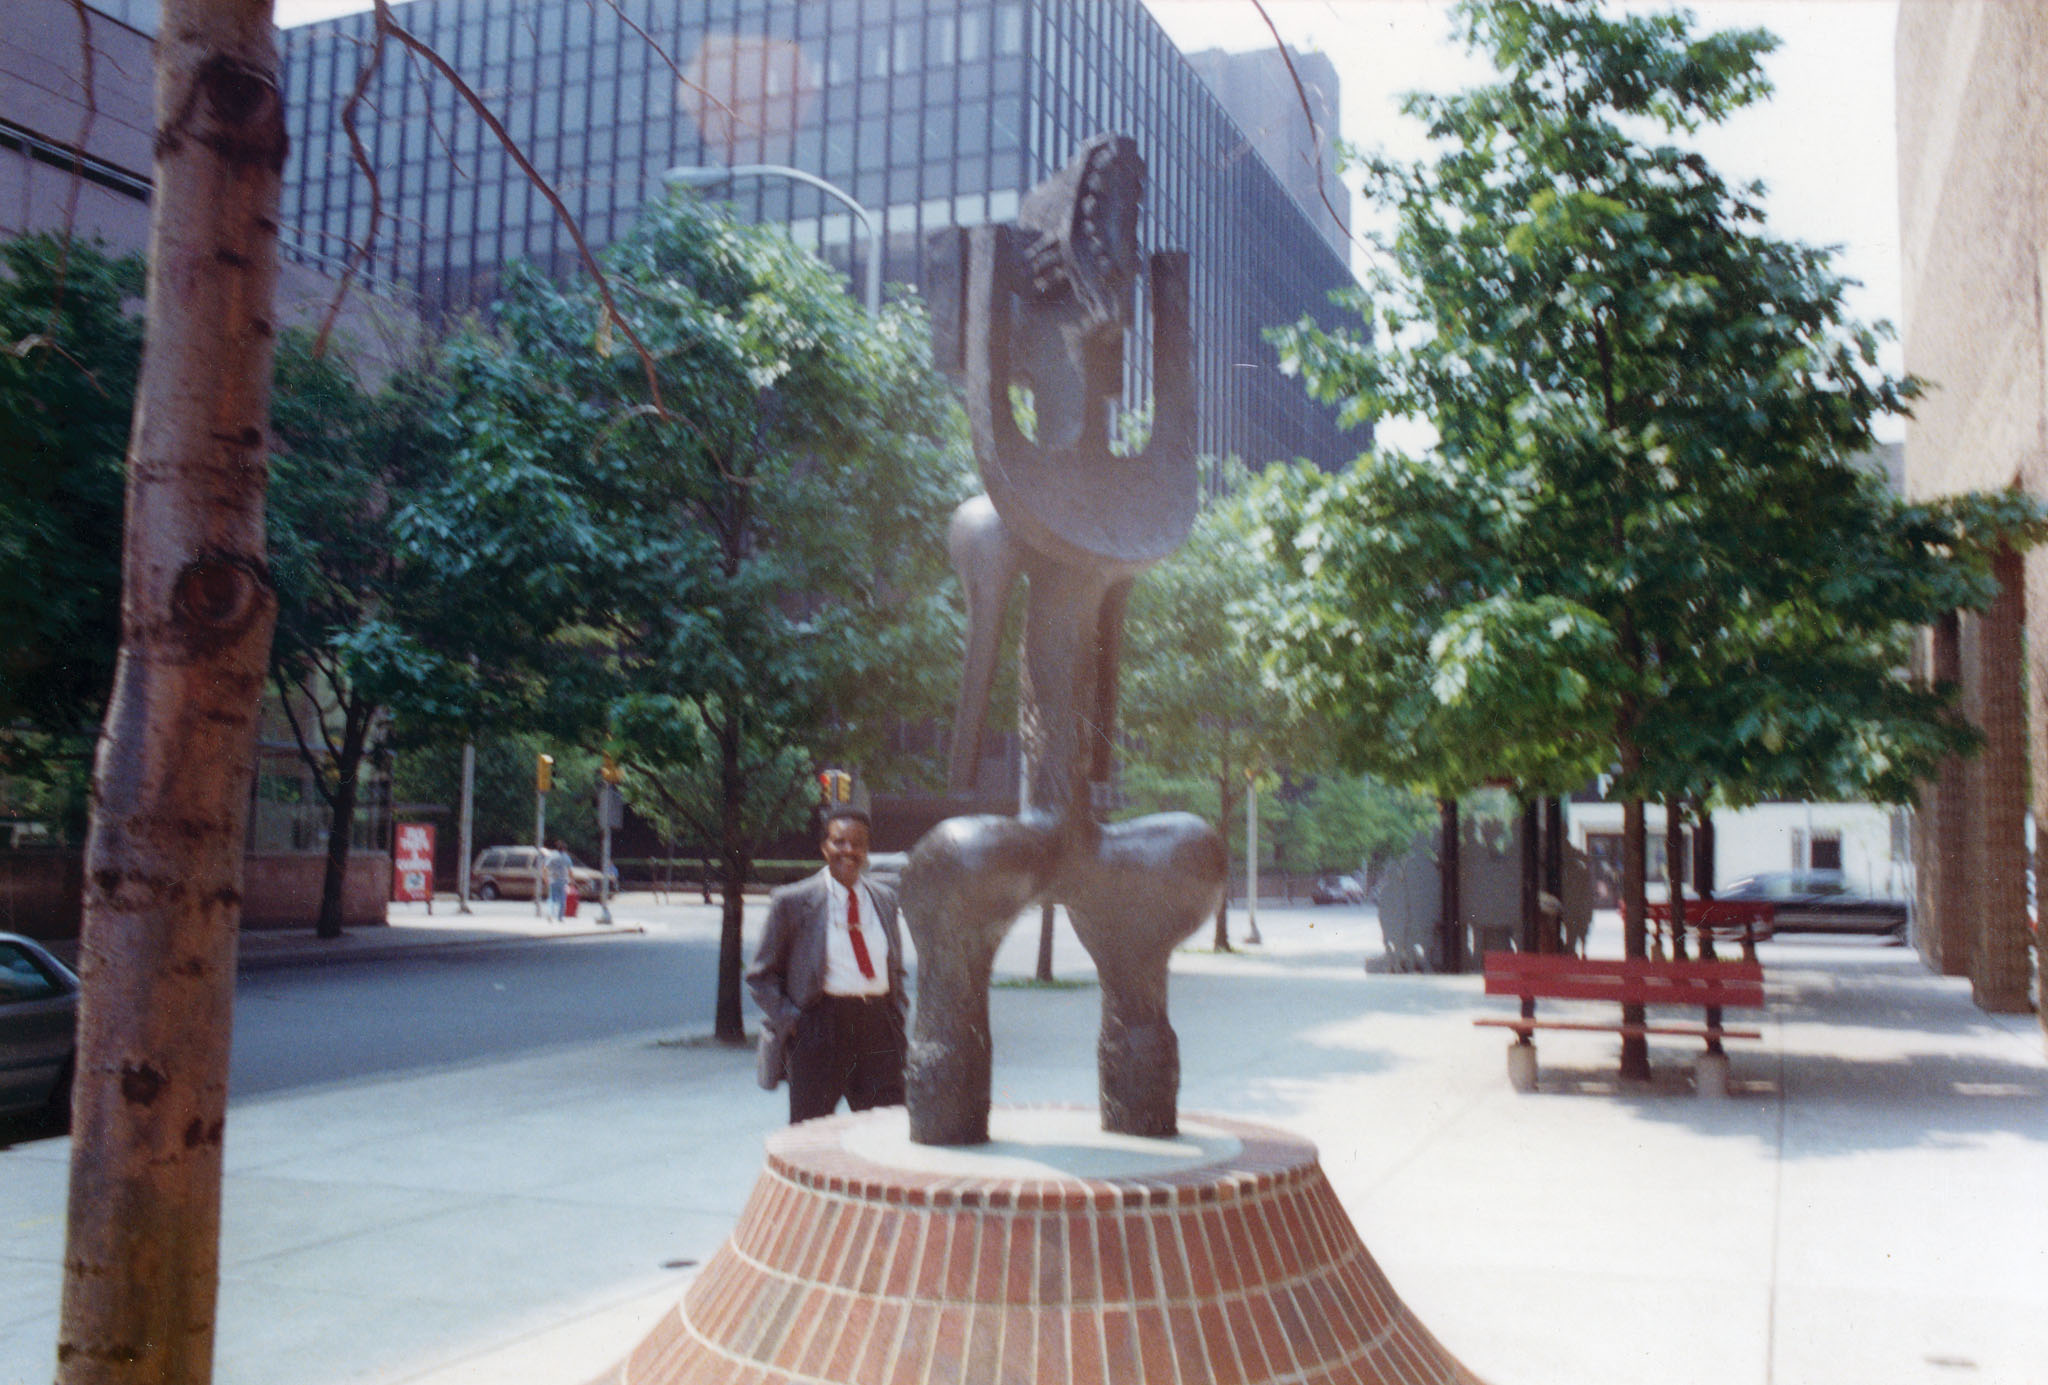 A person stands behind a sculpture mounted to a brink base.